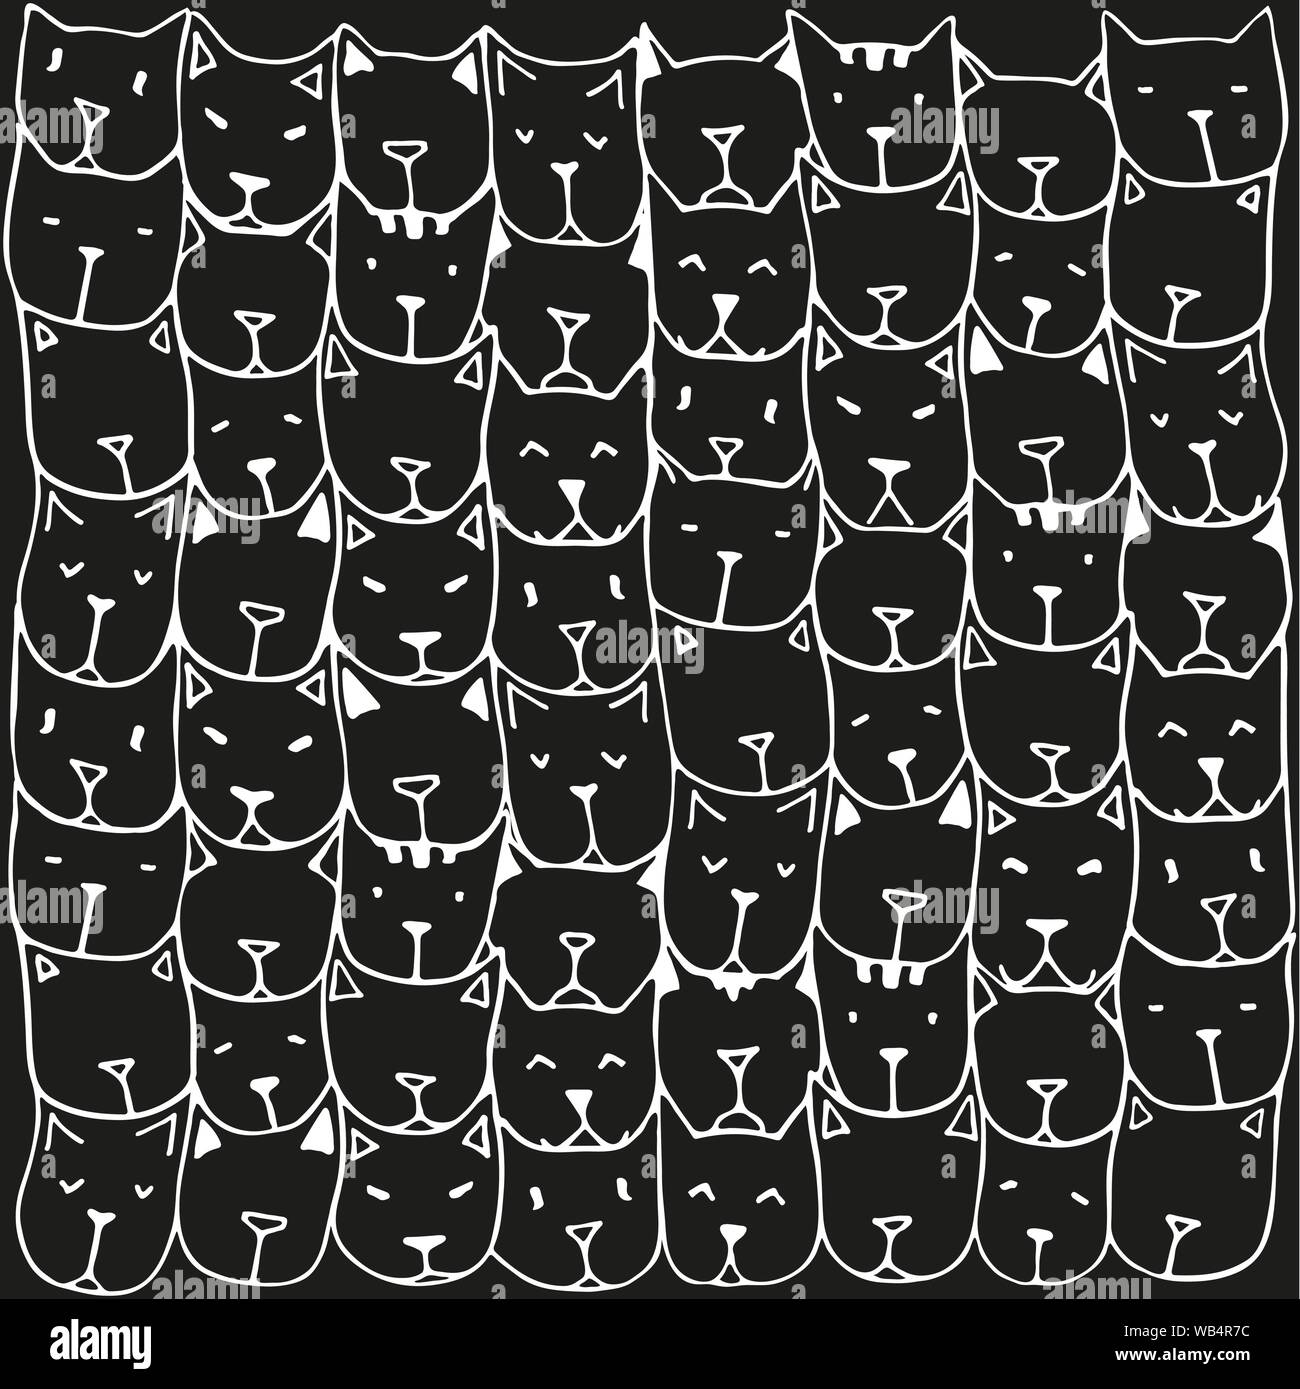 Seamles pattern with cute hand drawn doodle cats. Vintage vector illustration. Background with cat faces. Adult coloring pages. Coloring book. Stock Vector